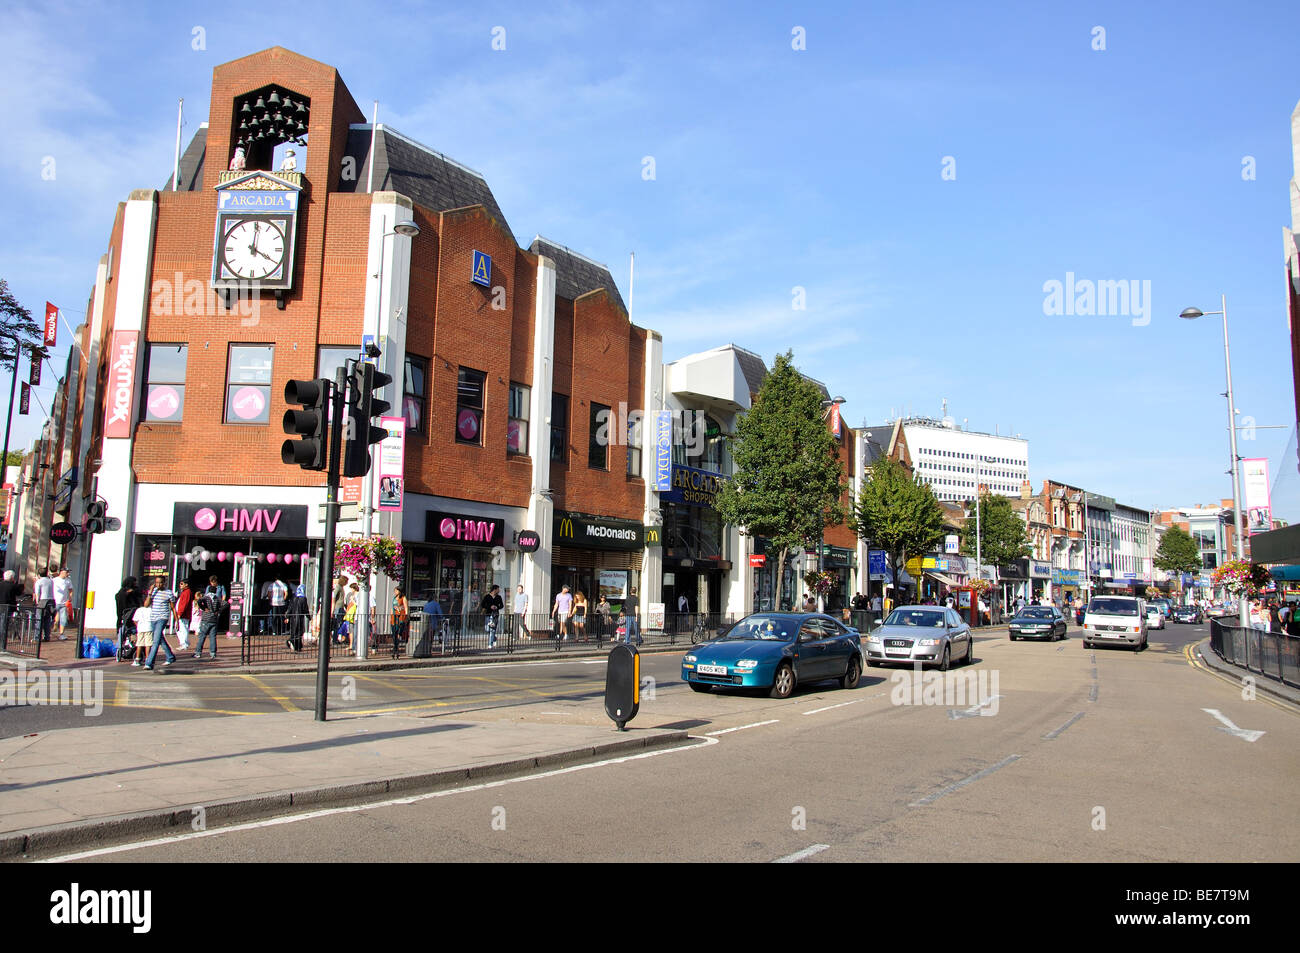 Ealing Broadway, Ealing, London Borough of Ealing, Greater London, Angleterre, Royaume-Uni Banque D'Images